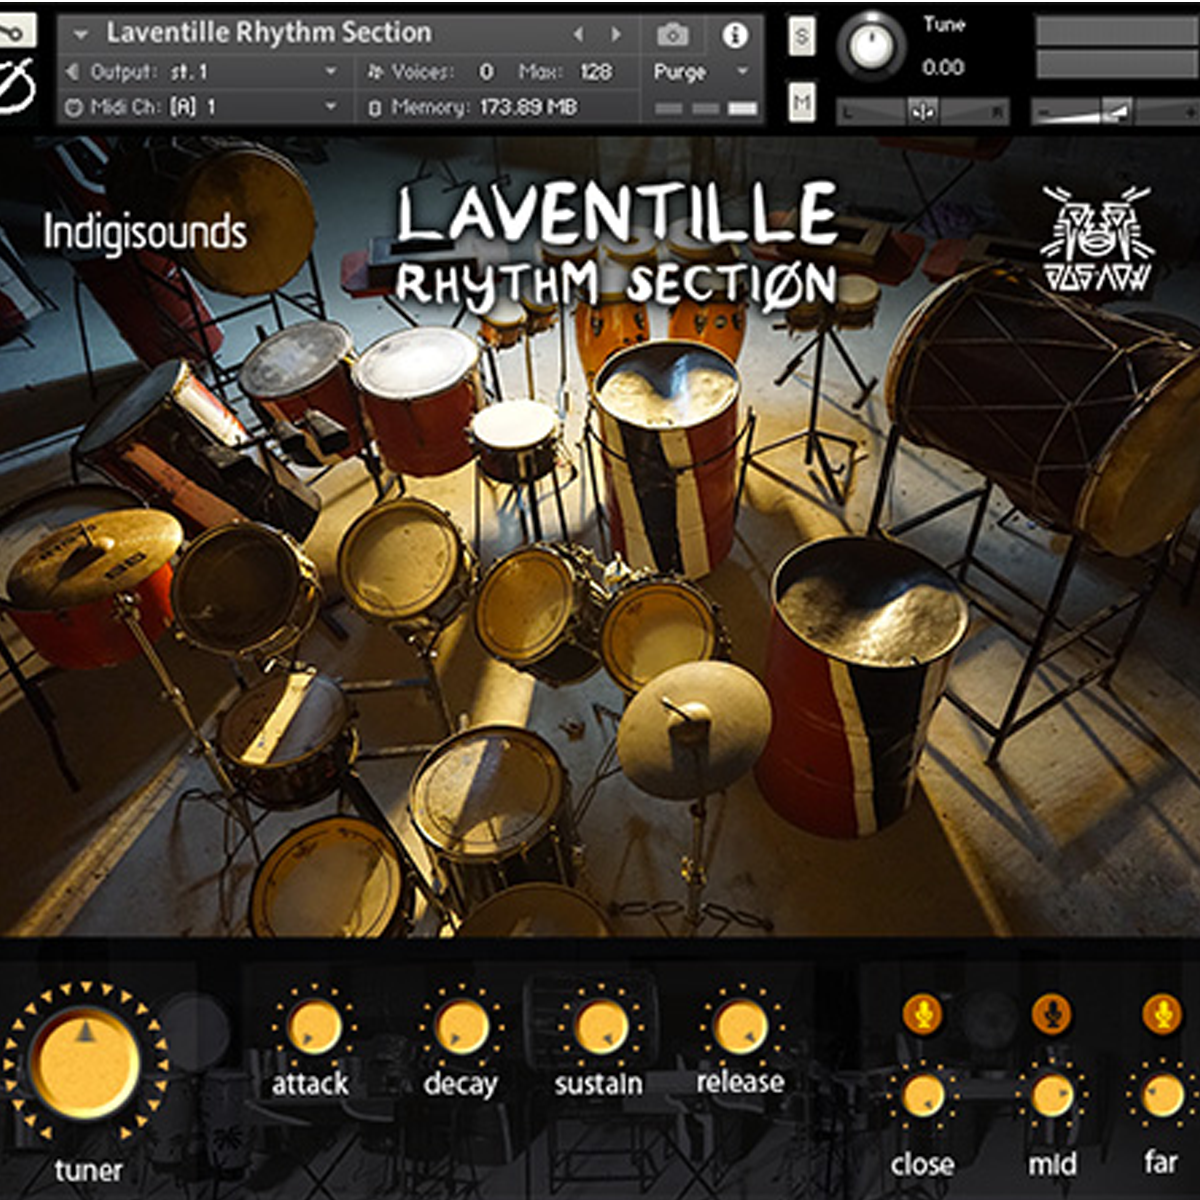 Indigisounds Laventille Rhythm Section "Engine Room" Percussion Samples 1035-730